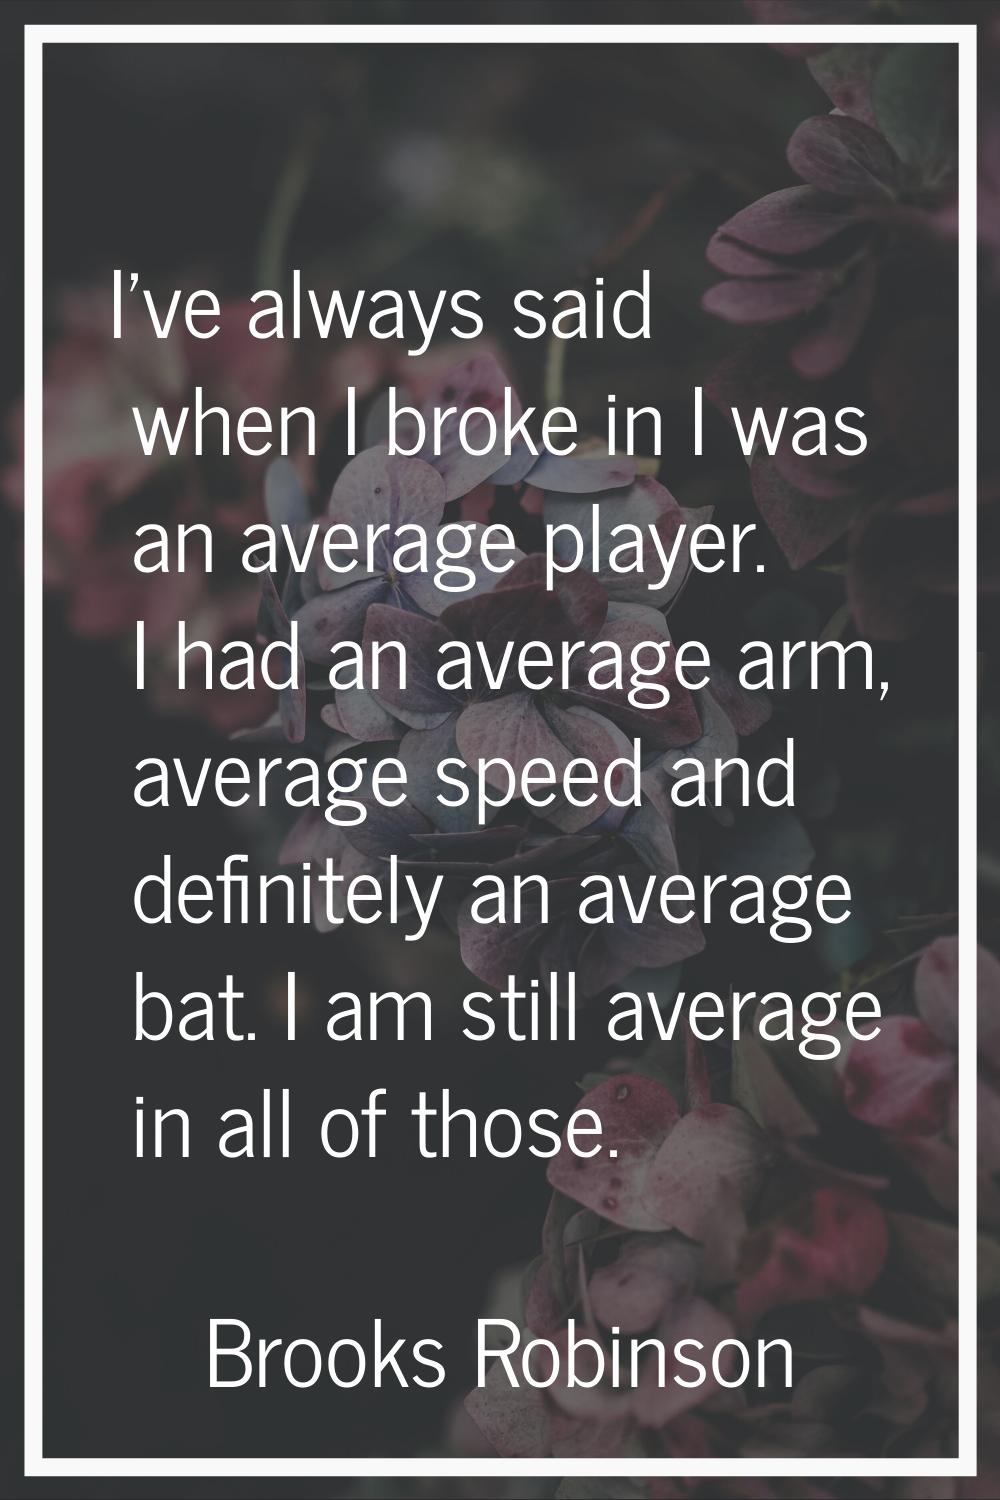 I've always said when I broke in I was an average player. I had an average arm, average speed and d